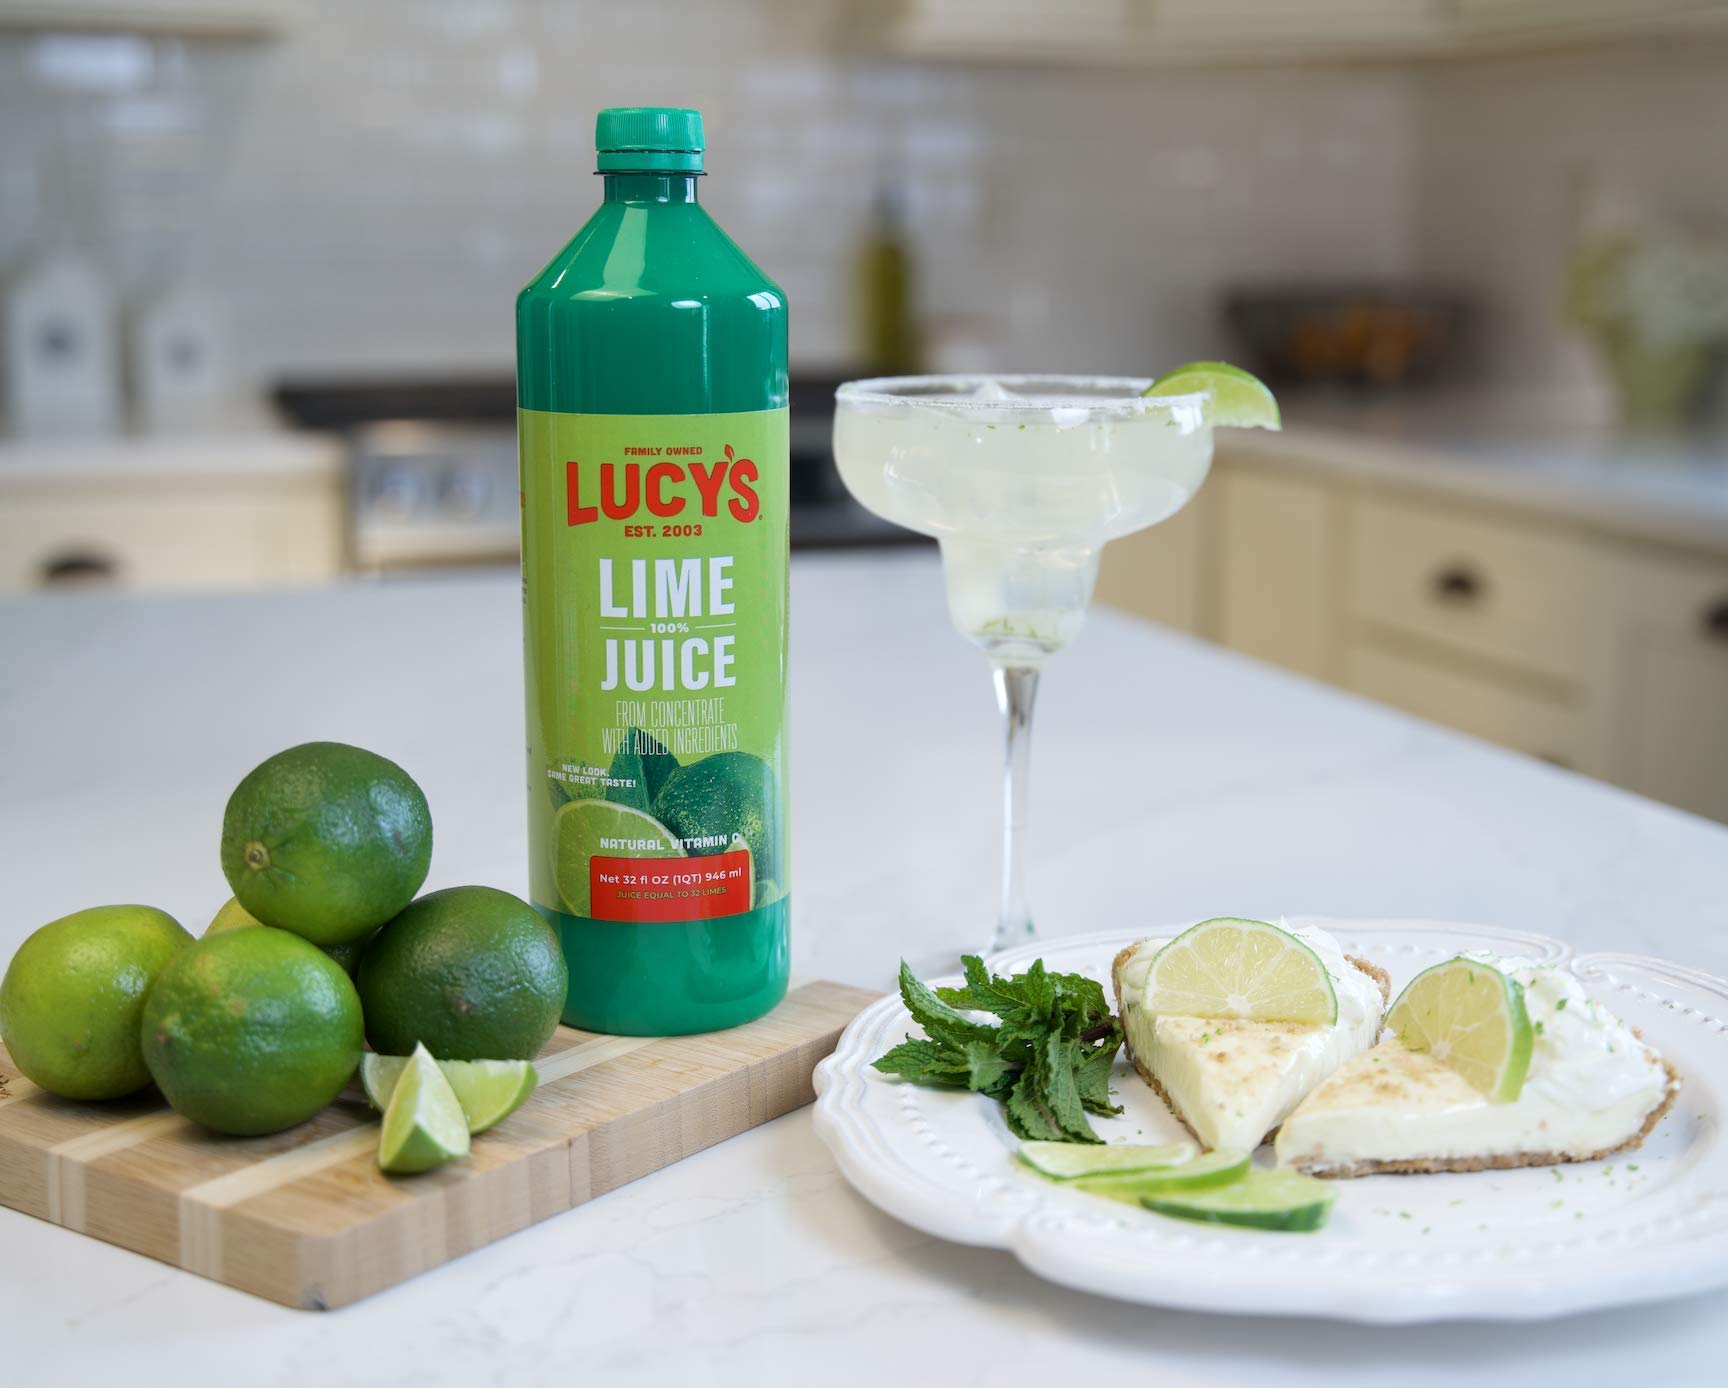 Lucy’s Family Owned - 100% Lime Juice, 32 oz. Bottle (Pack of 2)